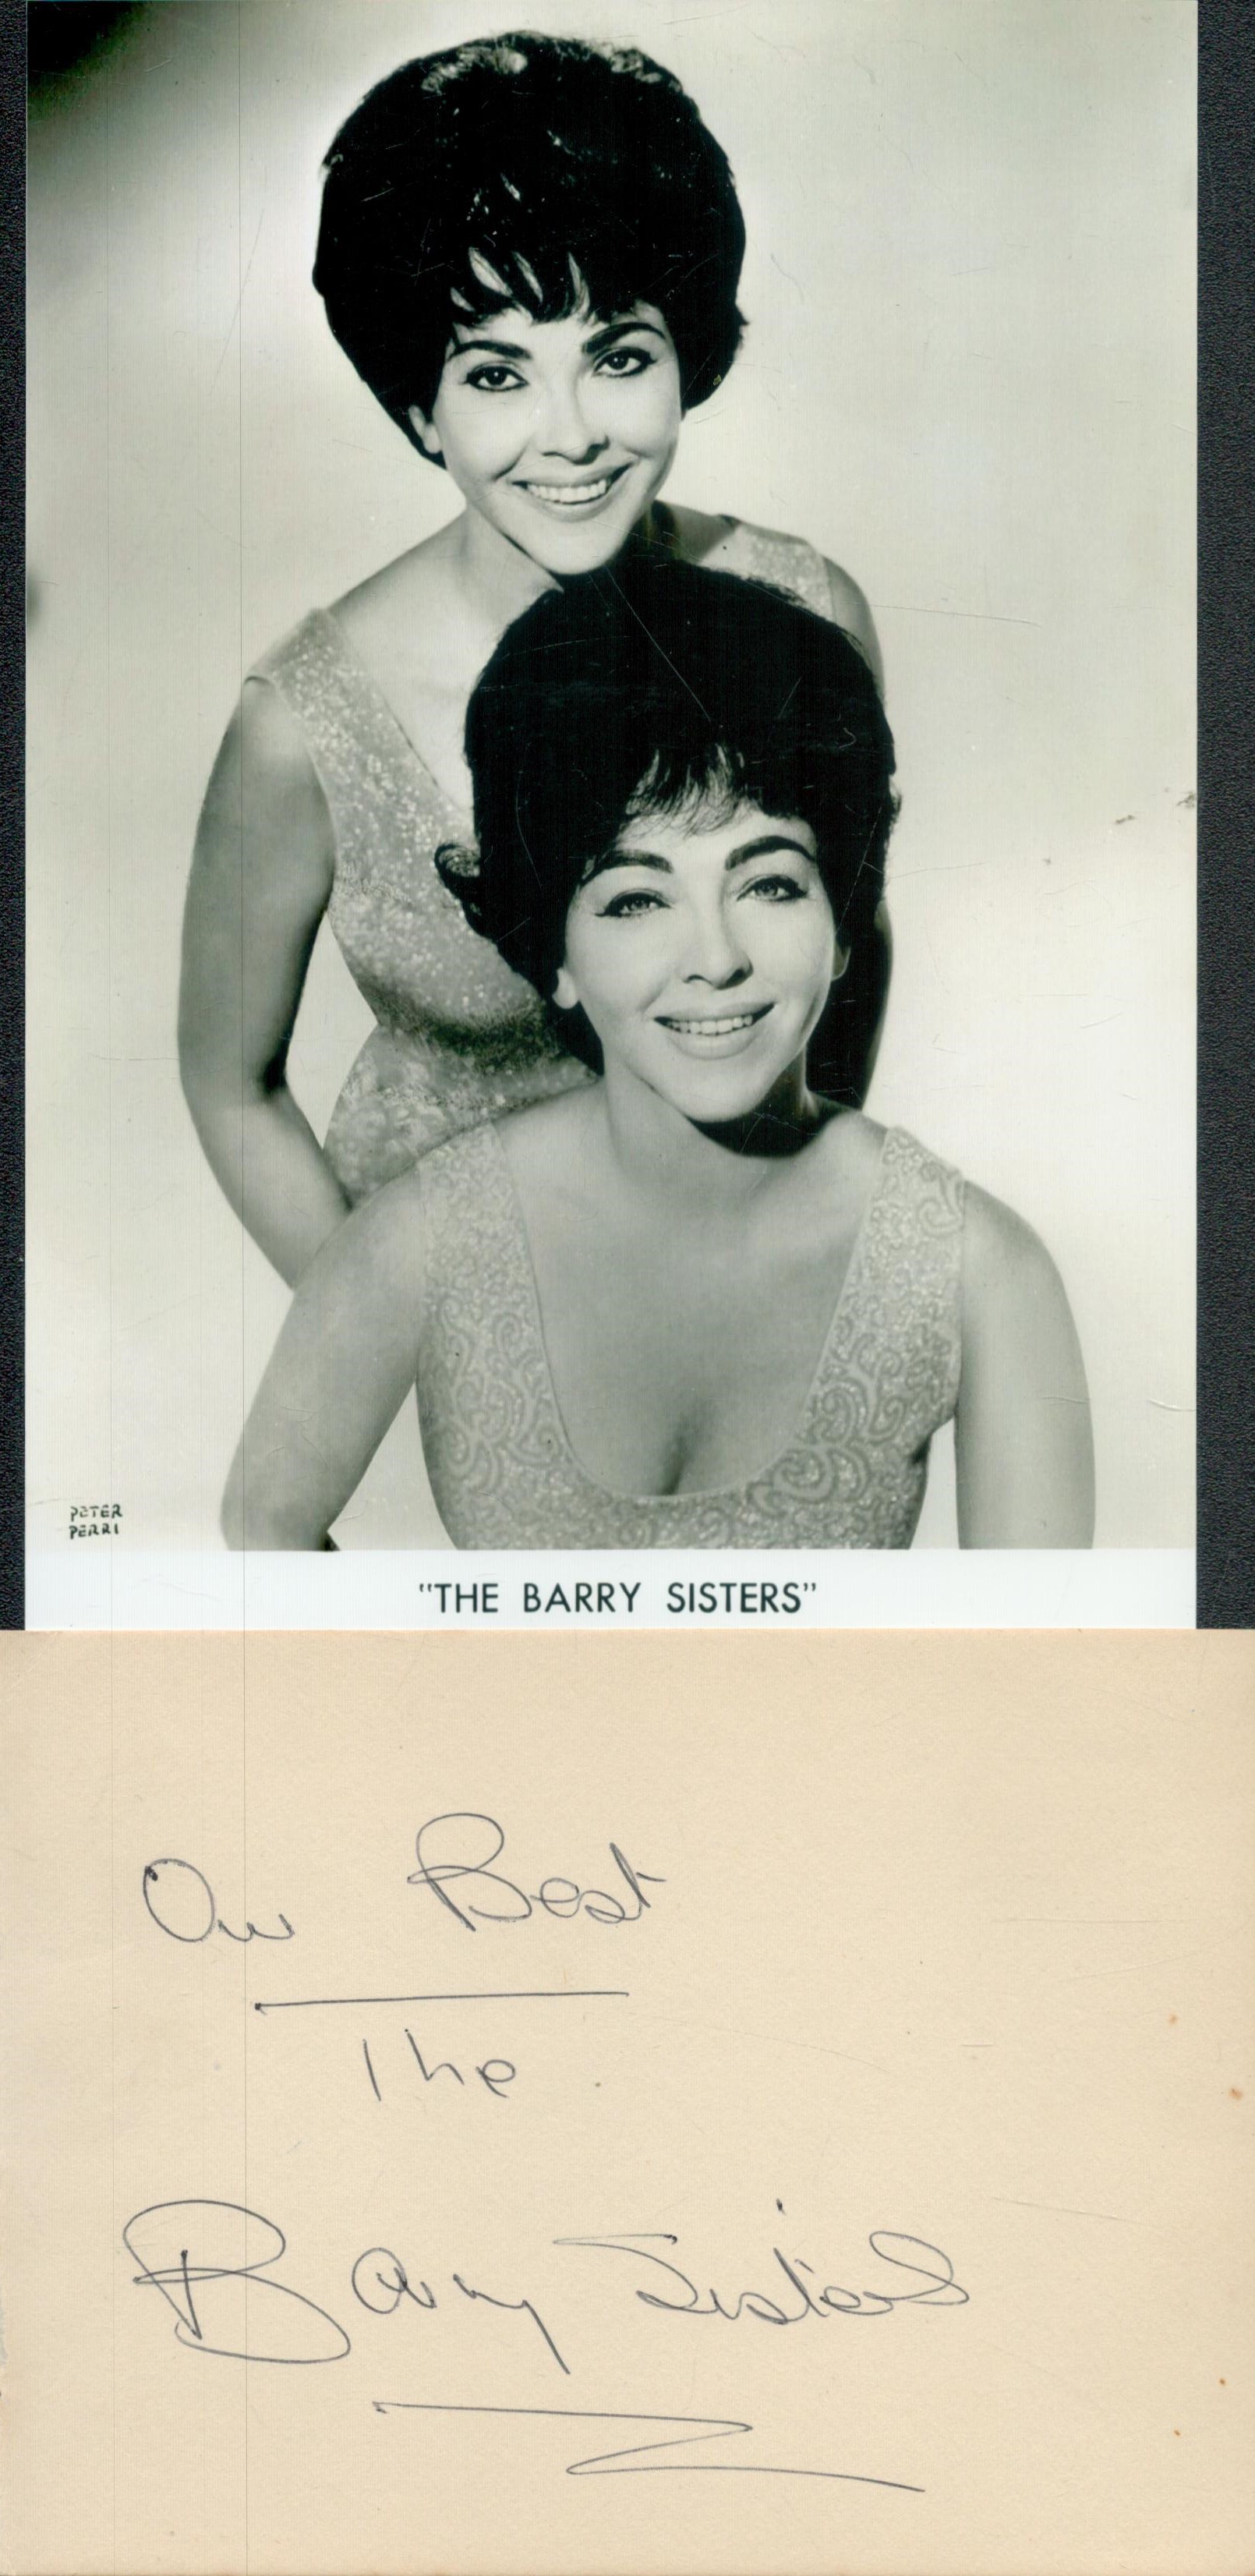 THE BARRY SISTERS Jazz Singers signed vintage Album Page with Photo. Good Condition. All